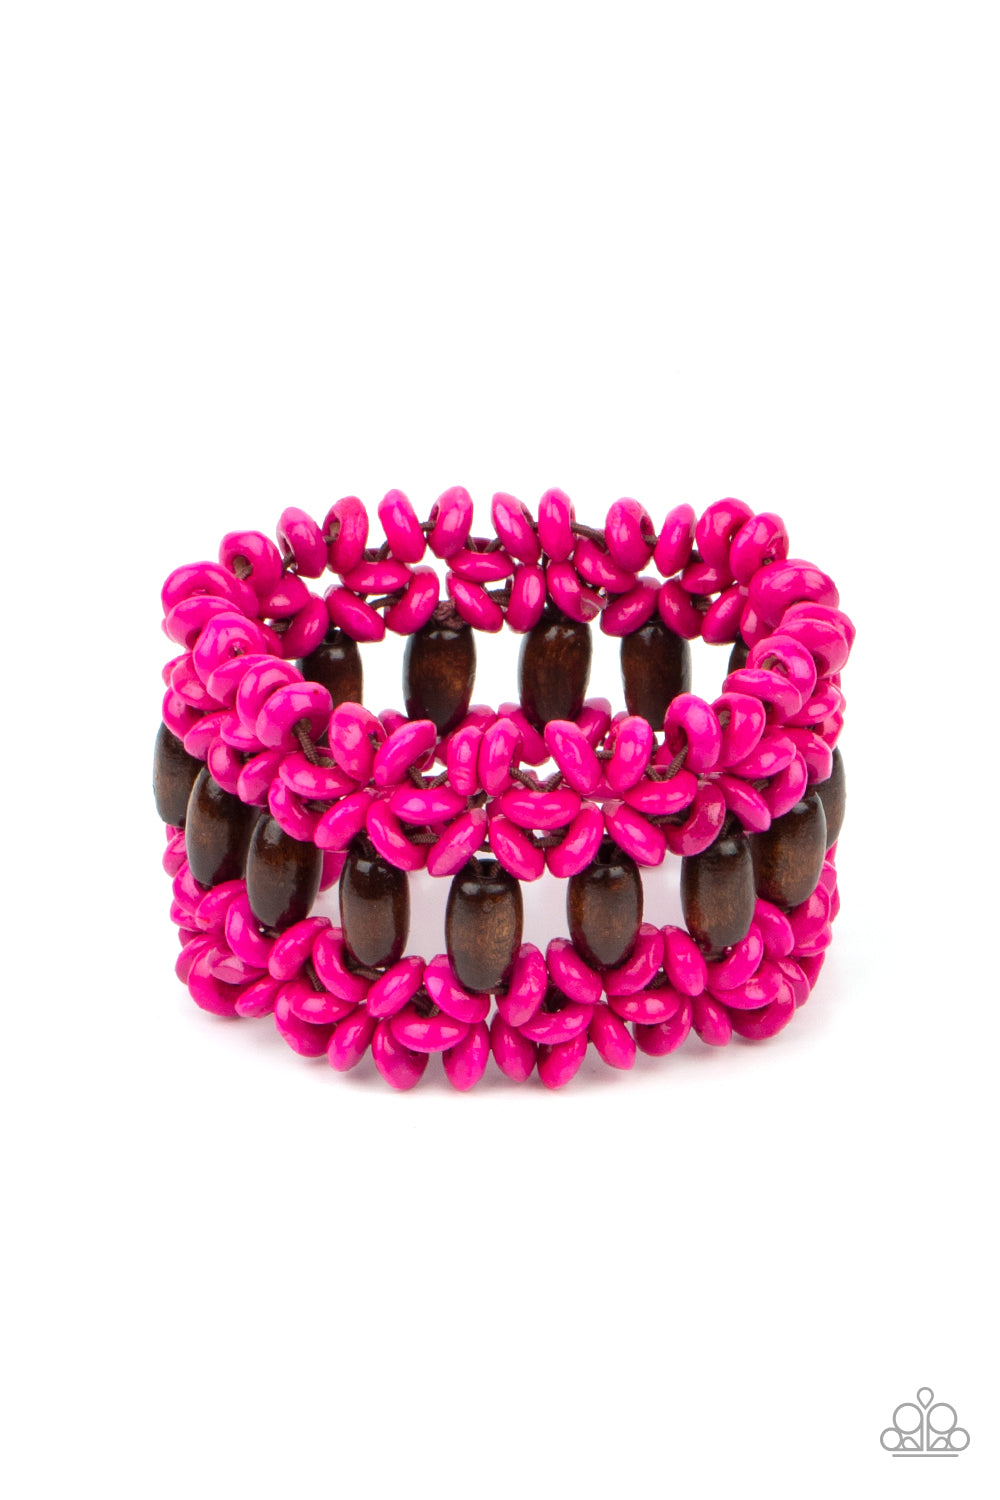 Pink wooden discs and brown wooden beads are threaded along braided stretchy bands around the wrist, creating a colorful tropical display.